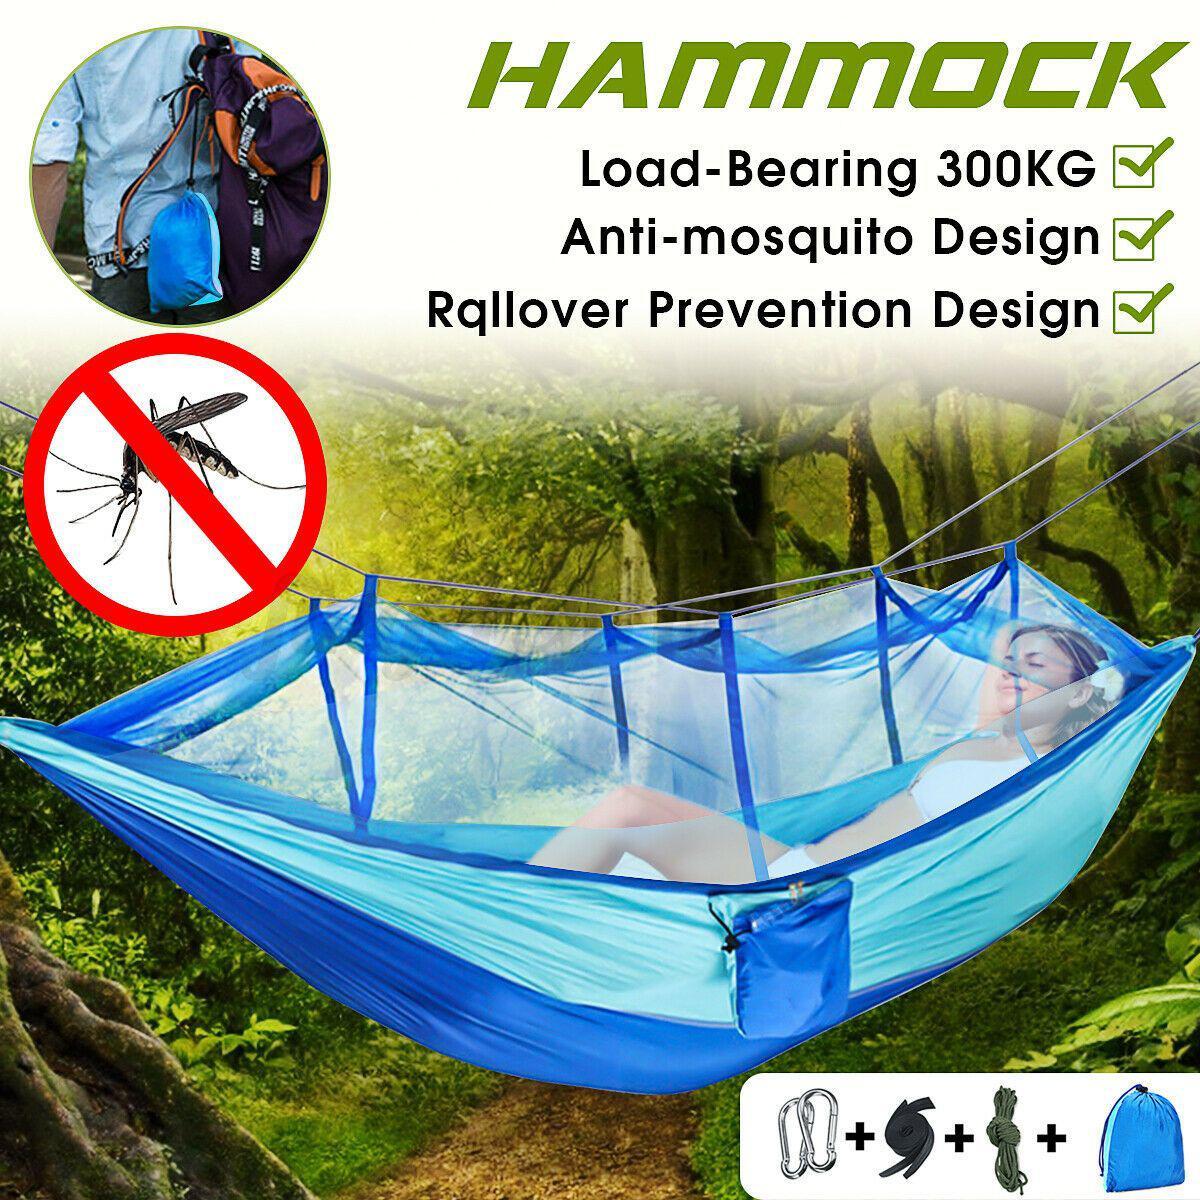 mosquito camping hammock bed